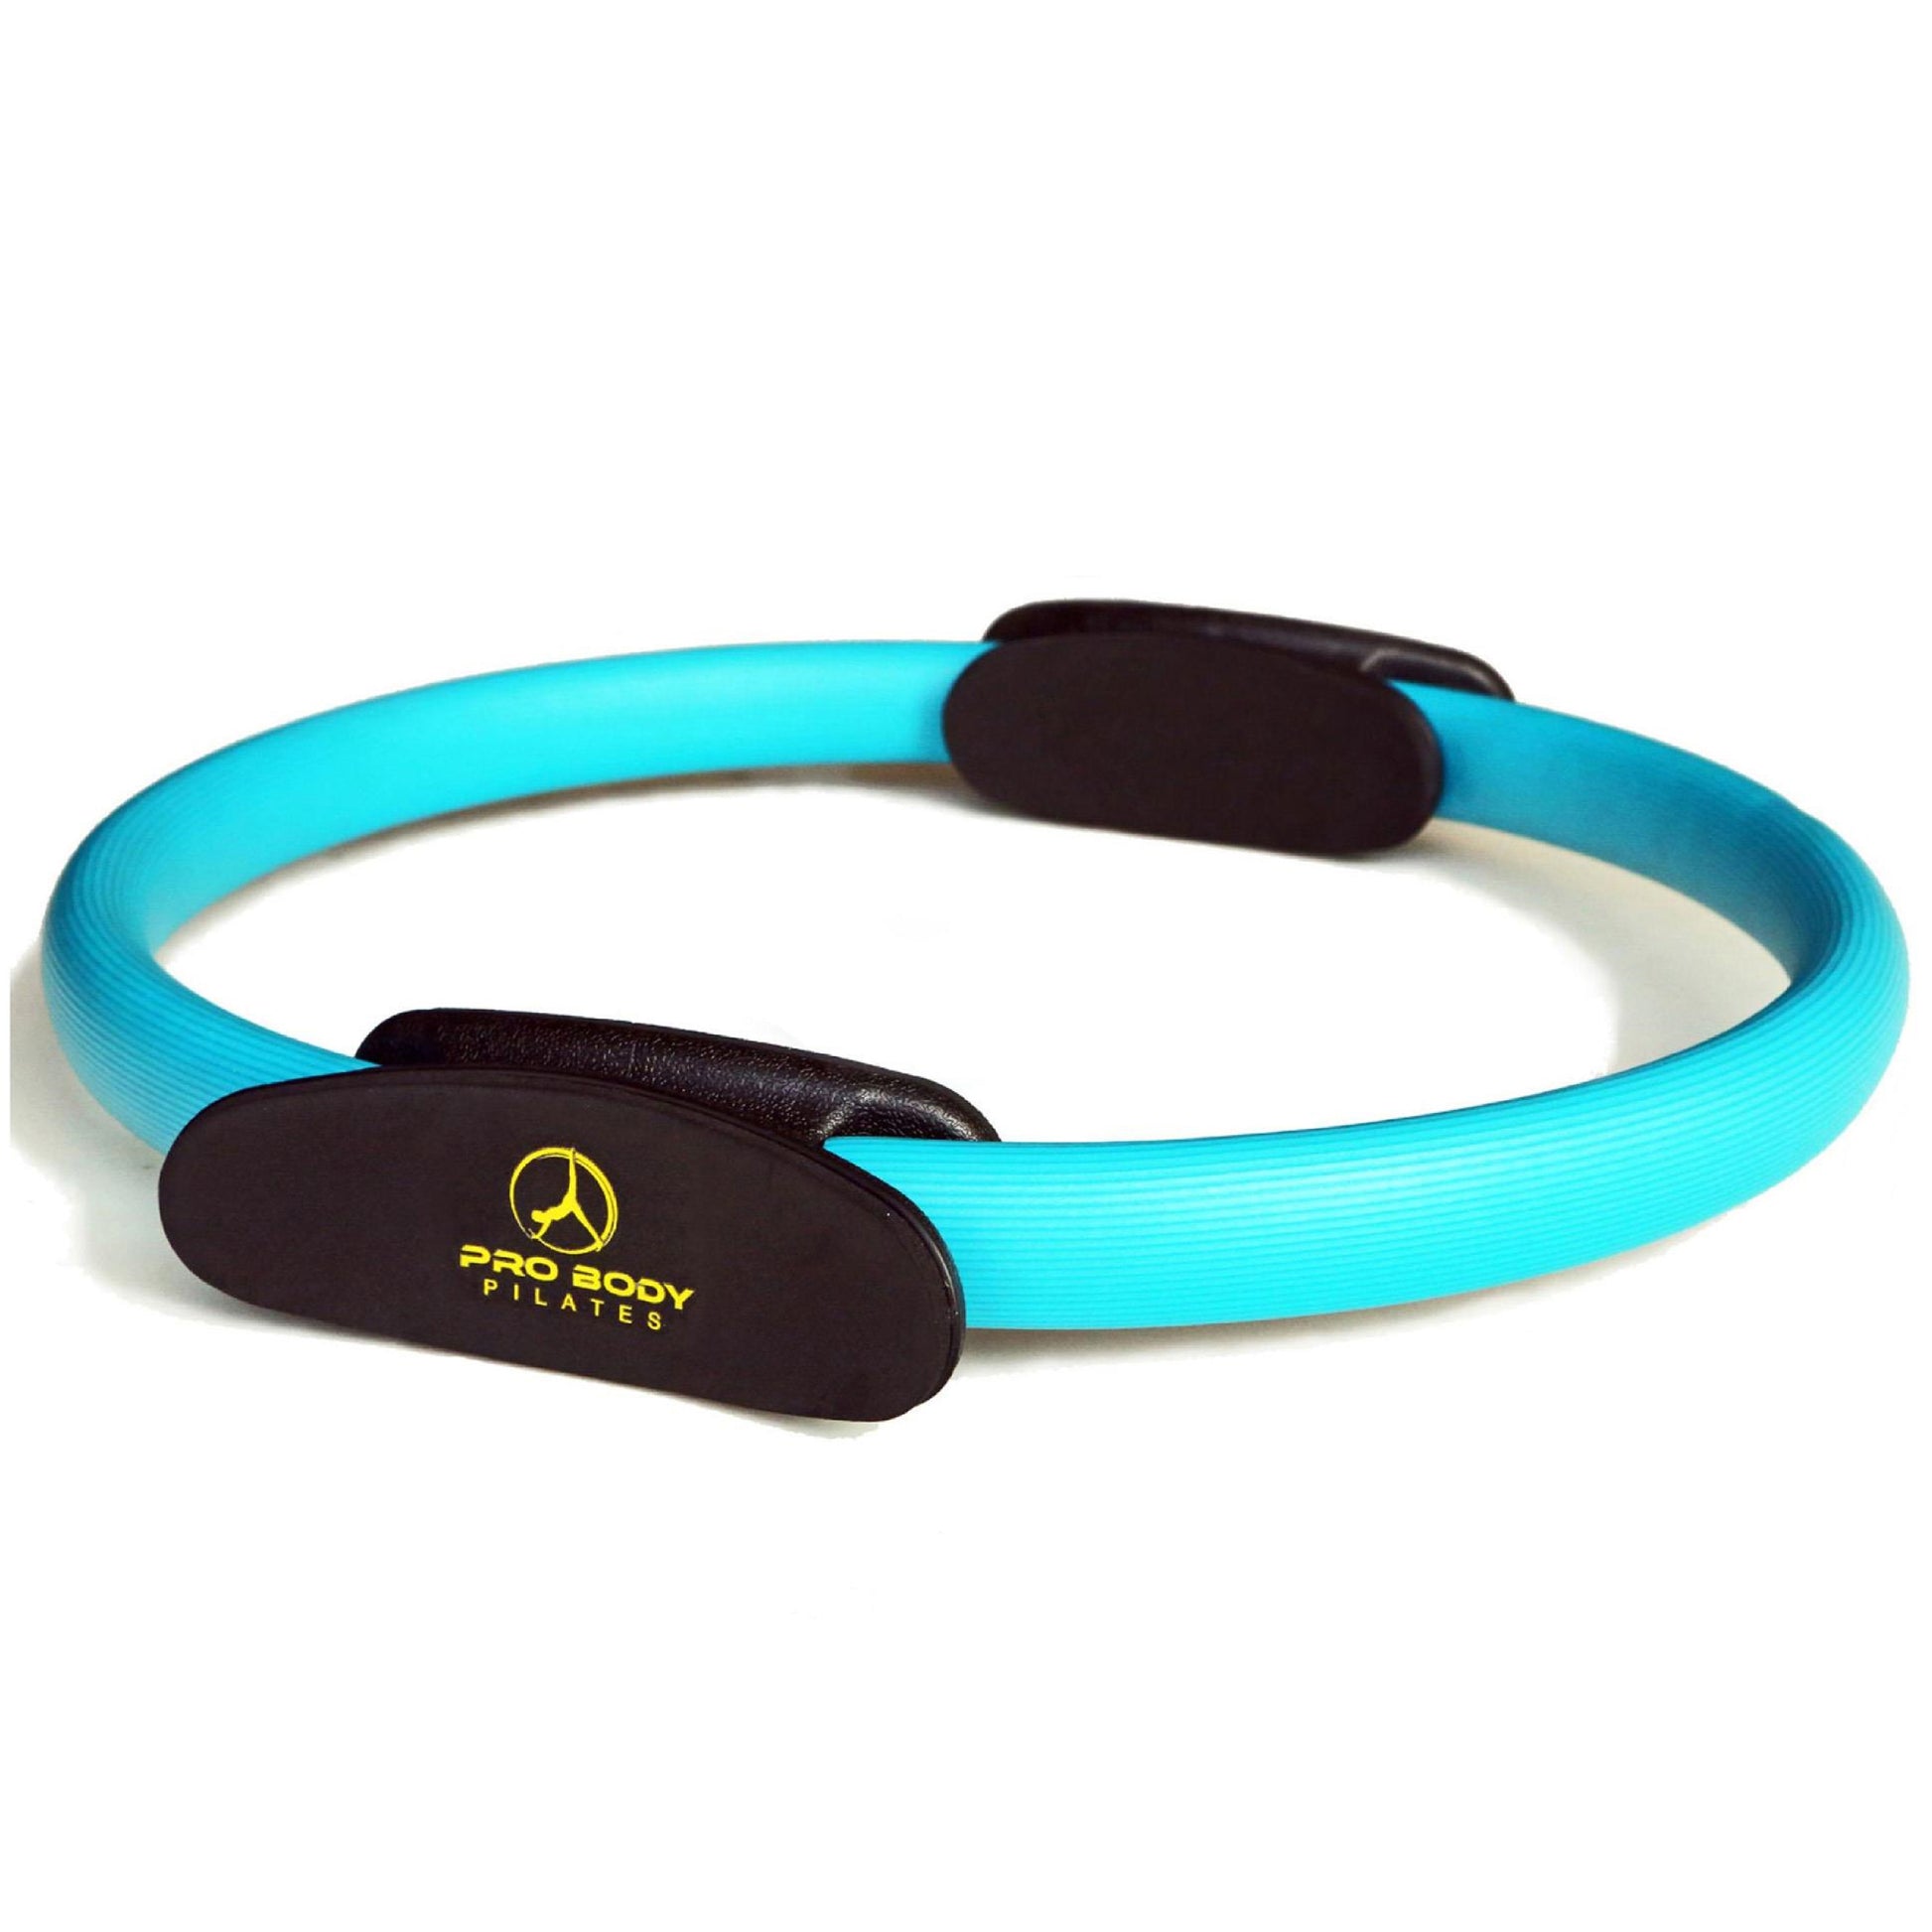 Yoga Circle Pilates Ring Men Women Fitness Workout Sports Equipment  Accessories